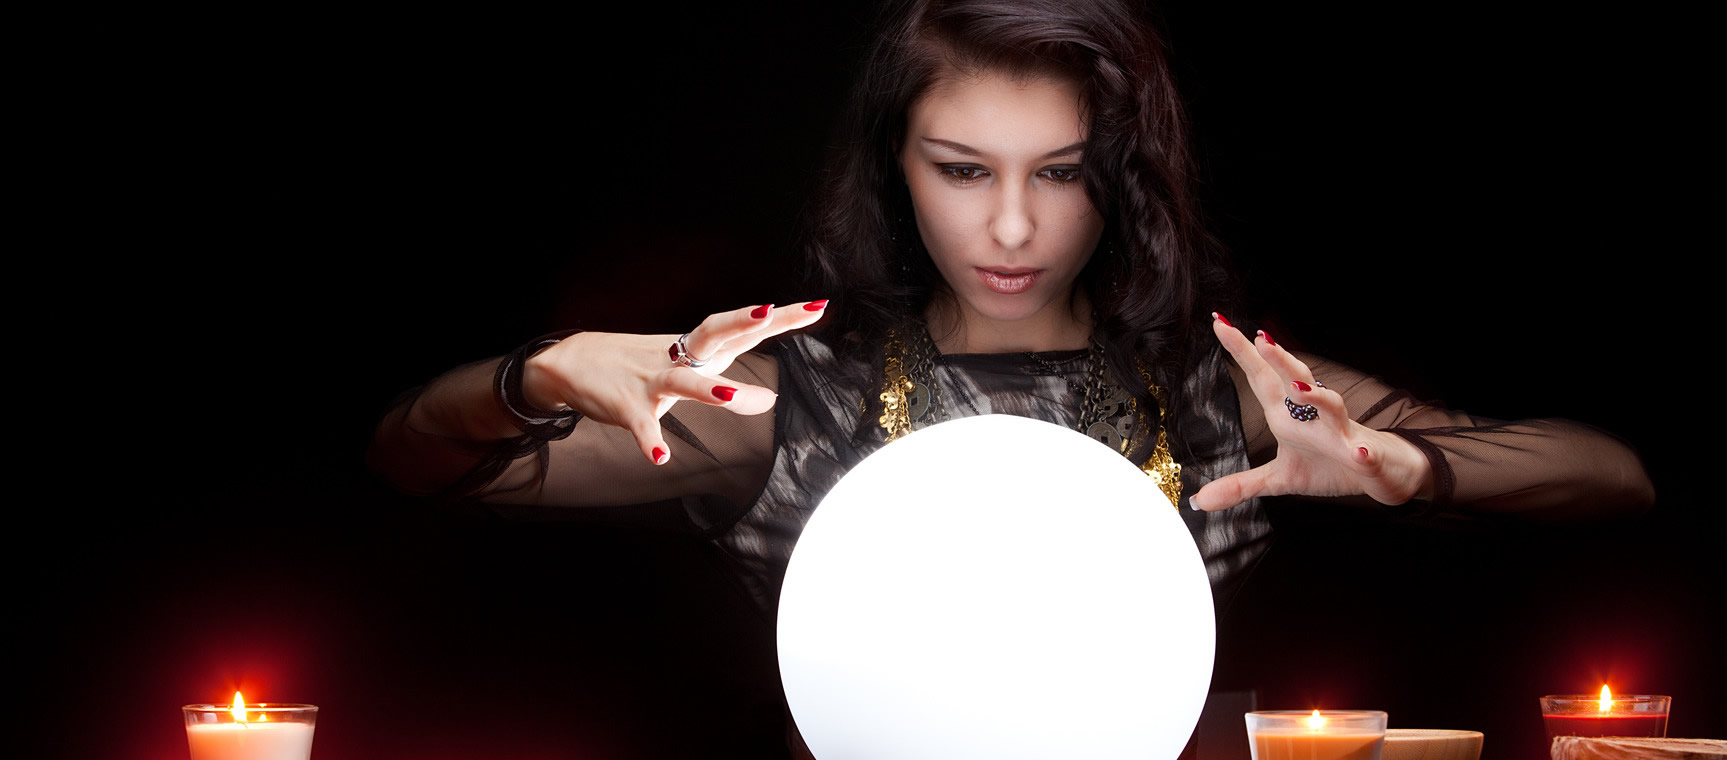 Calling a Psychic?  7 Things Worth Knowing About Online Psychic Readings